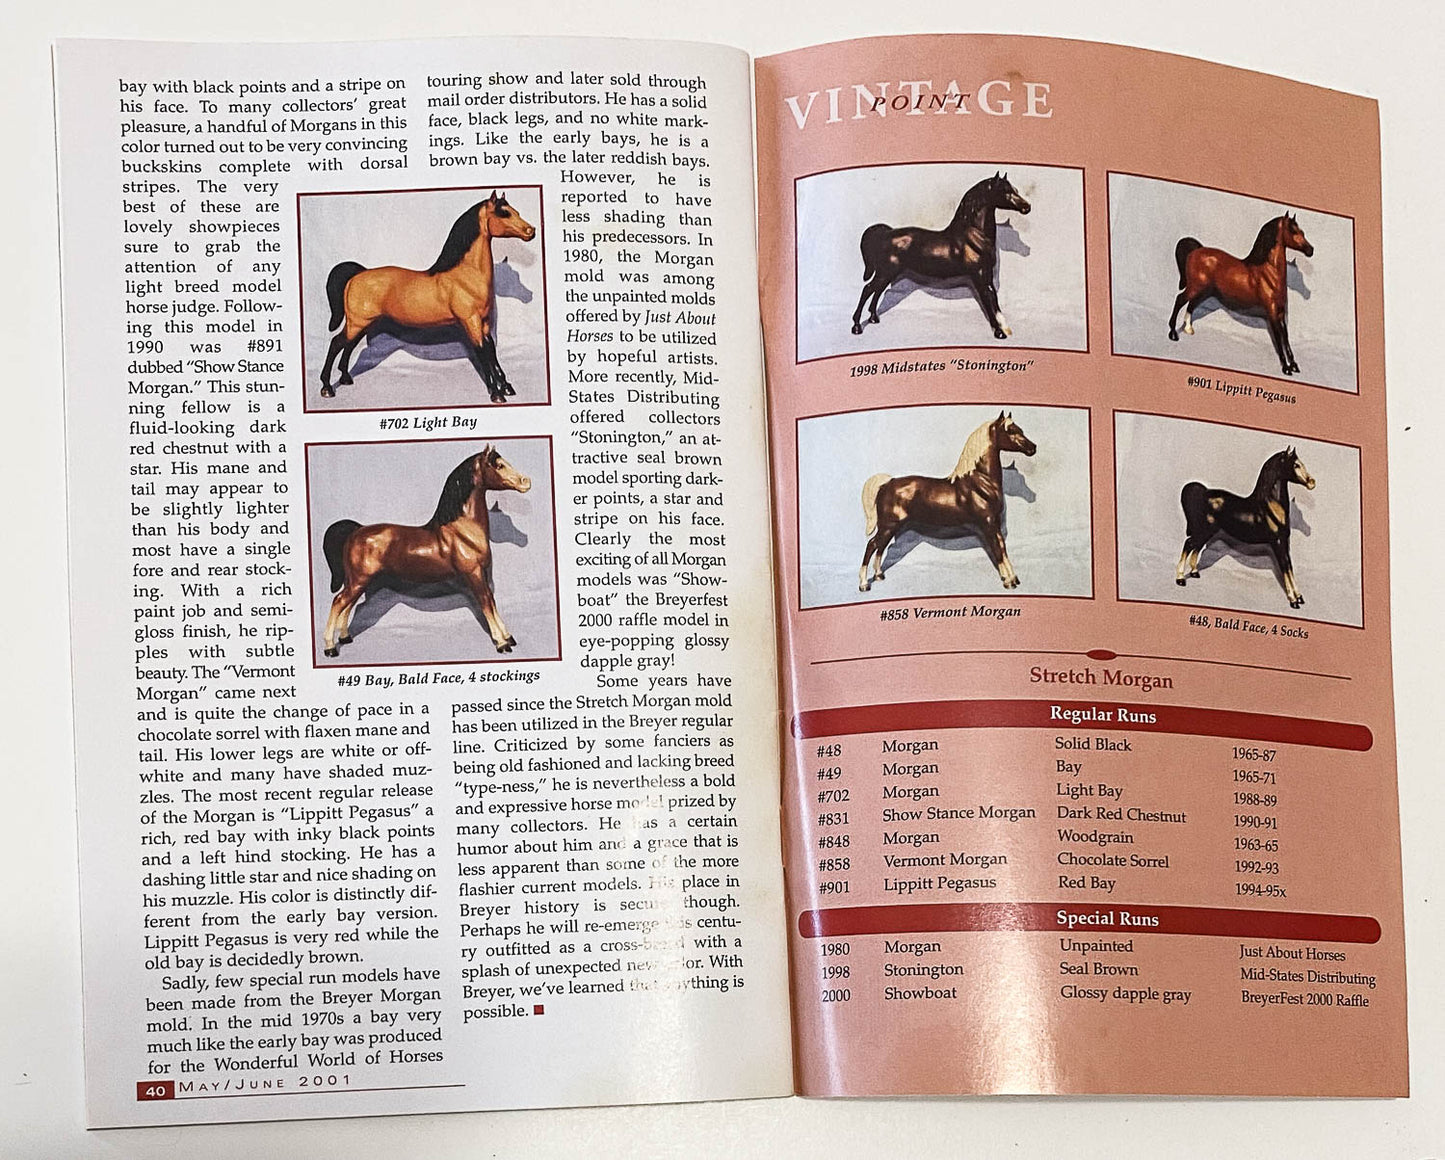 Just About Horses Magazine Vol. 28, No. 3, 2001 May/June